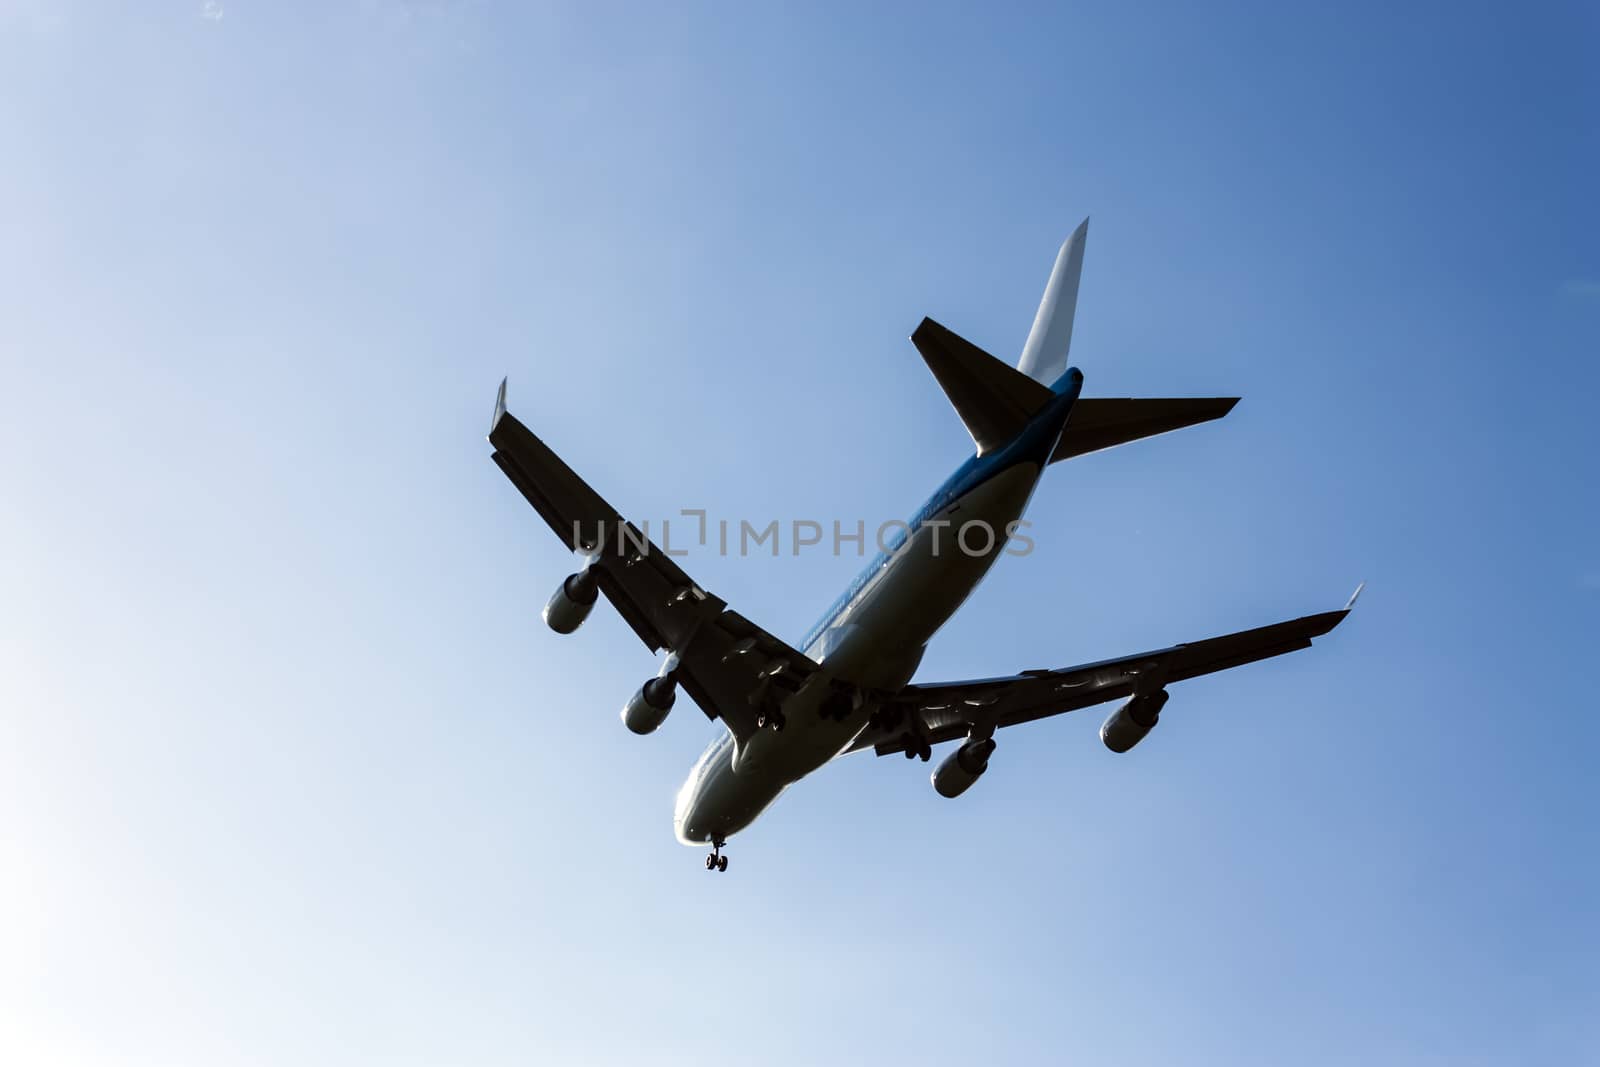 airplane flying at blue sky